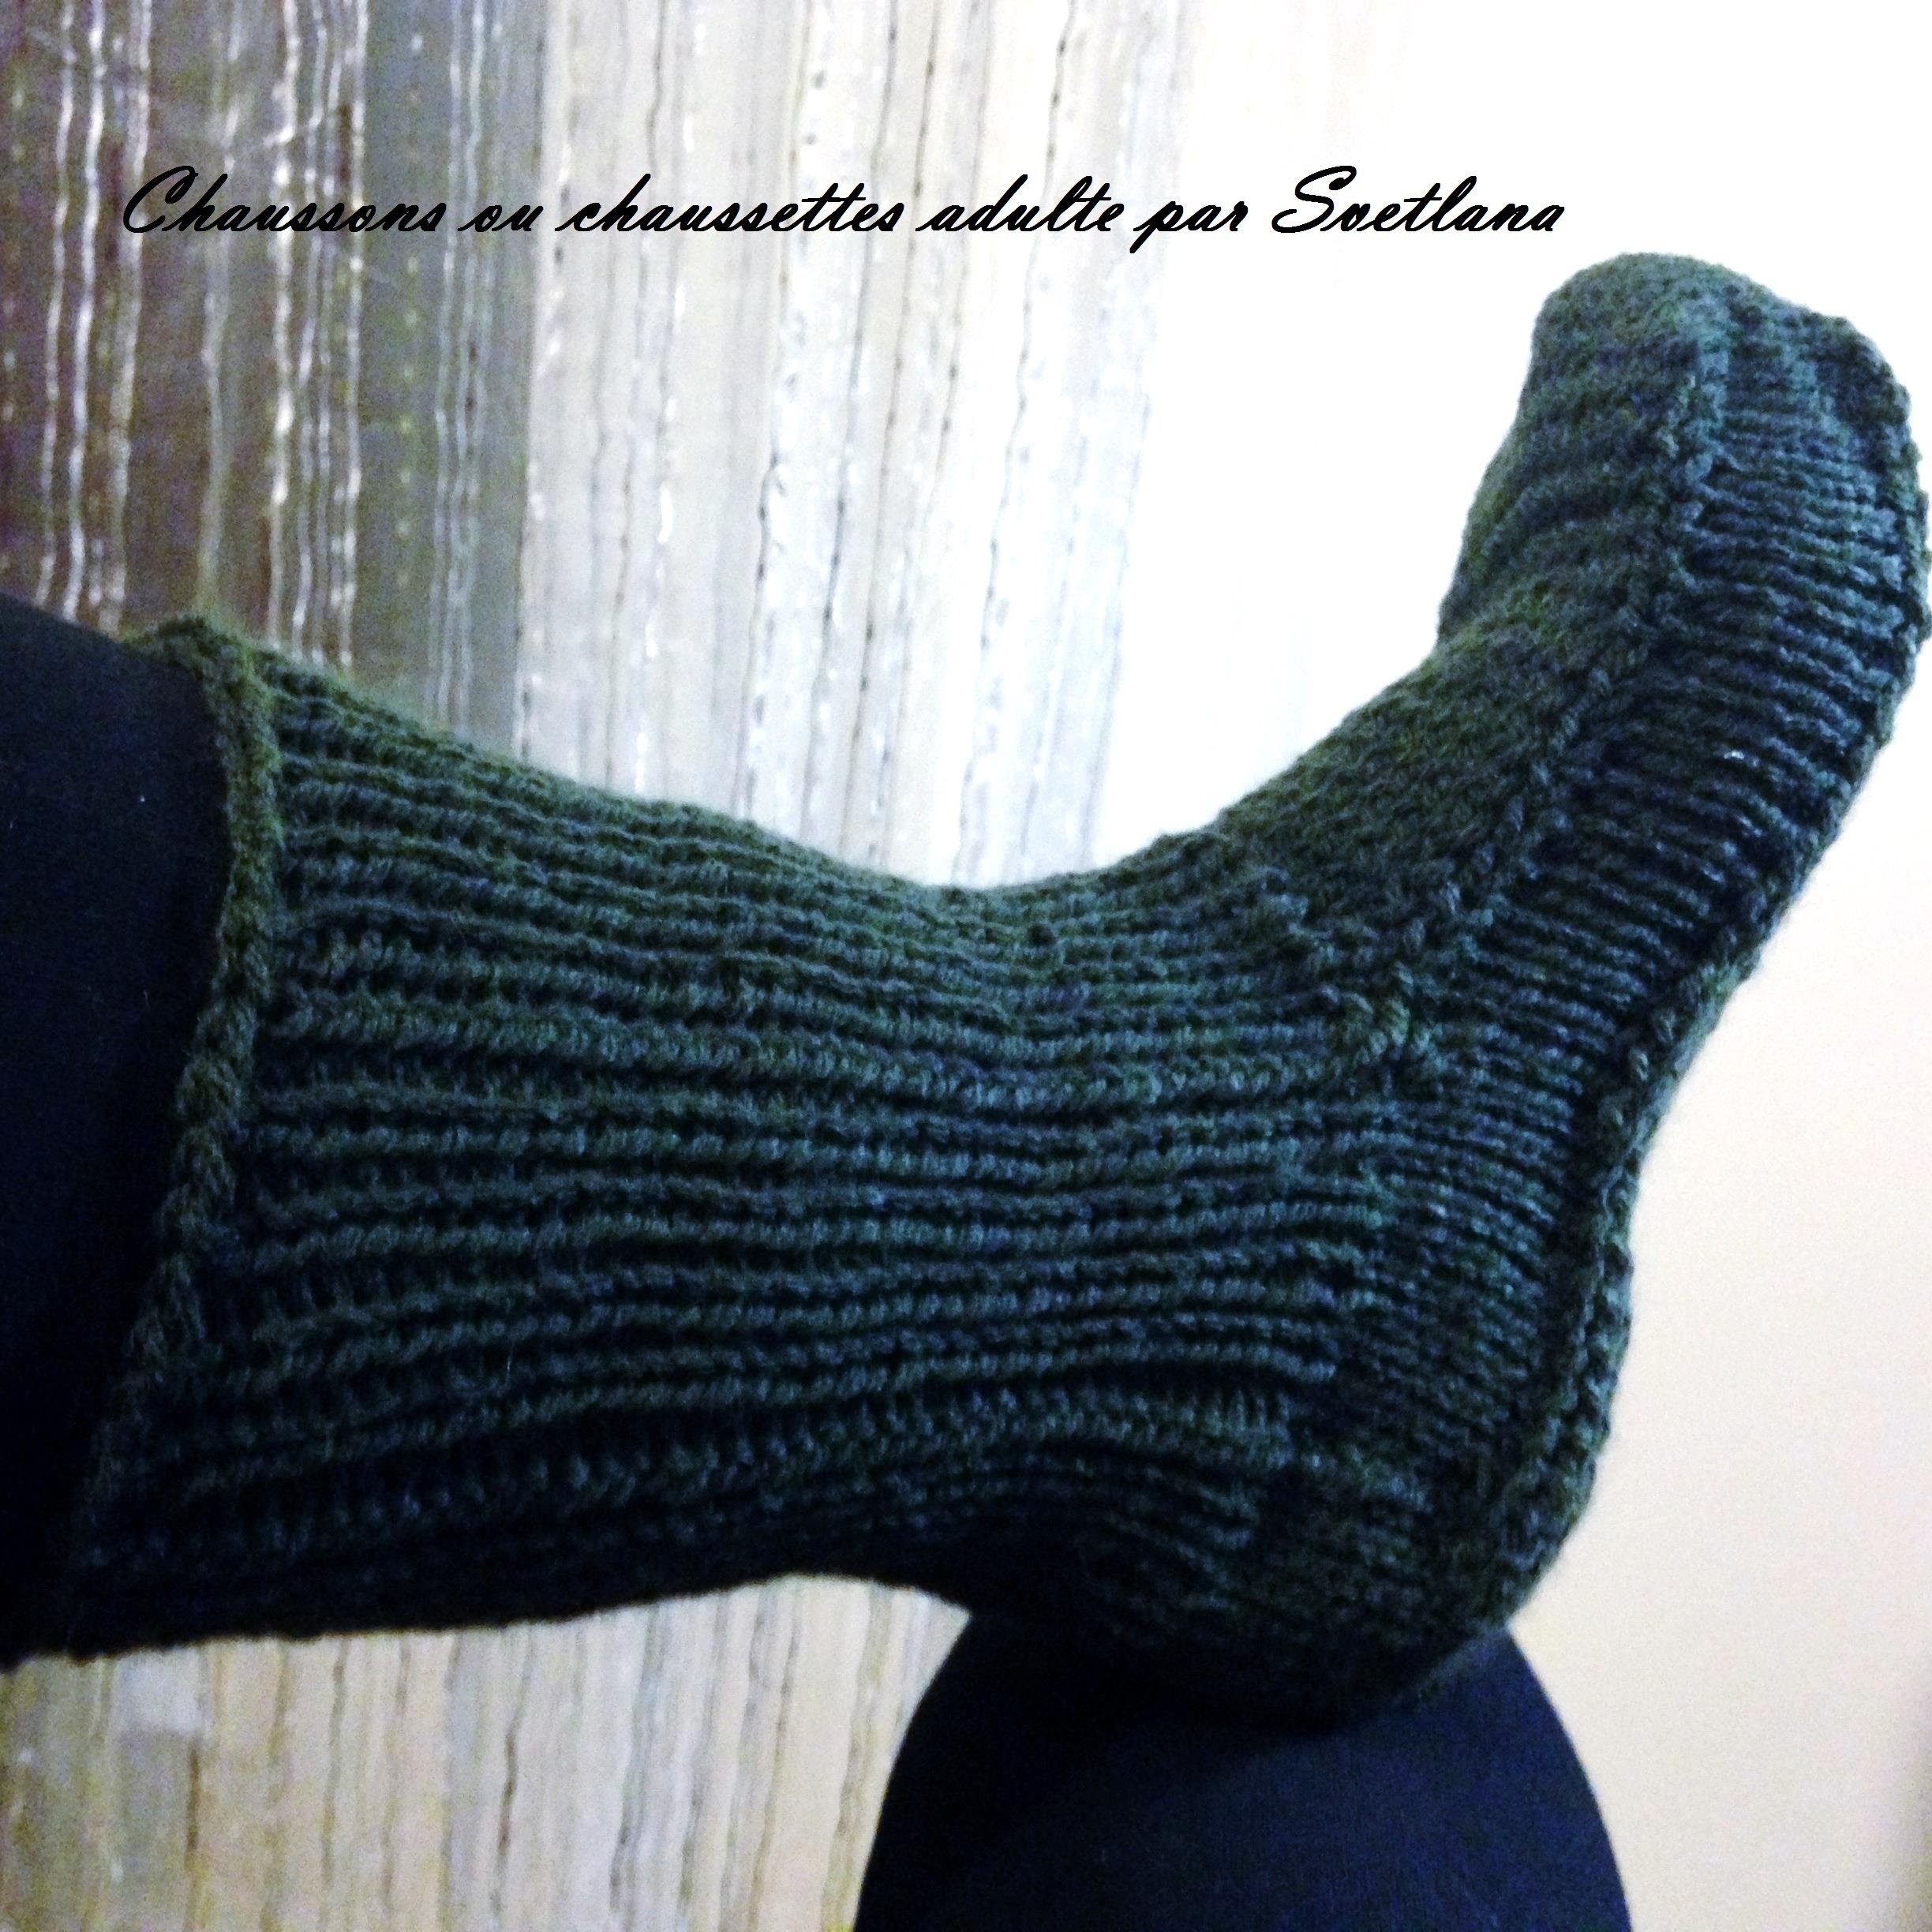 Tutoriel tricot chaussons ou chaussettes adulte.Tutorial knit adult slippers or socks